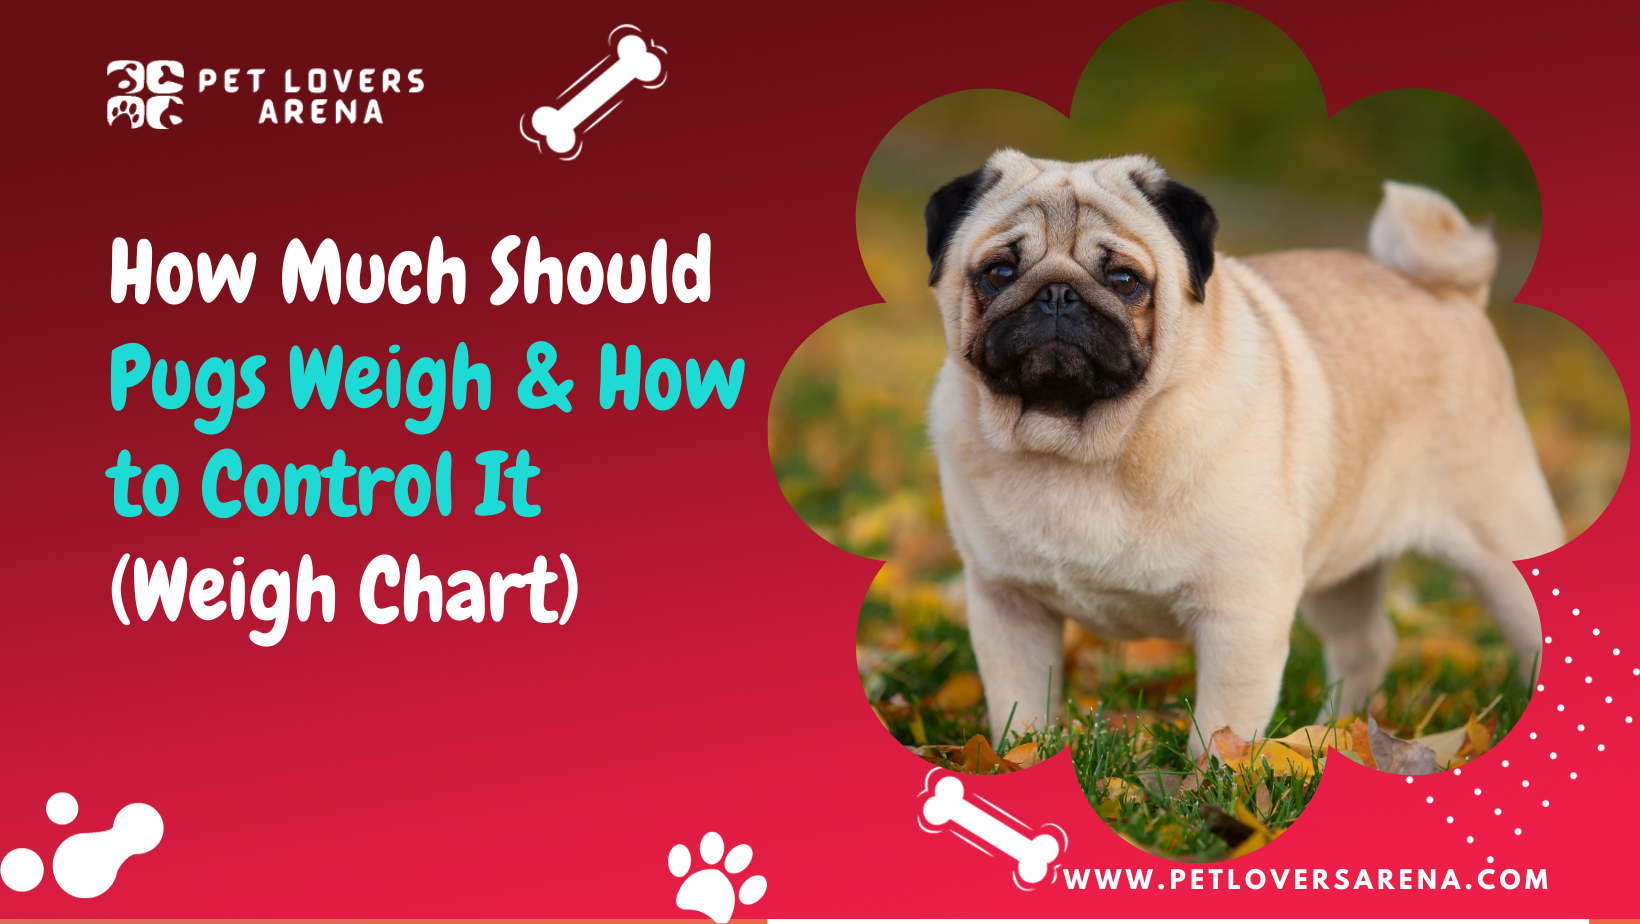 How Much Should Pugs Weigh